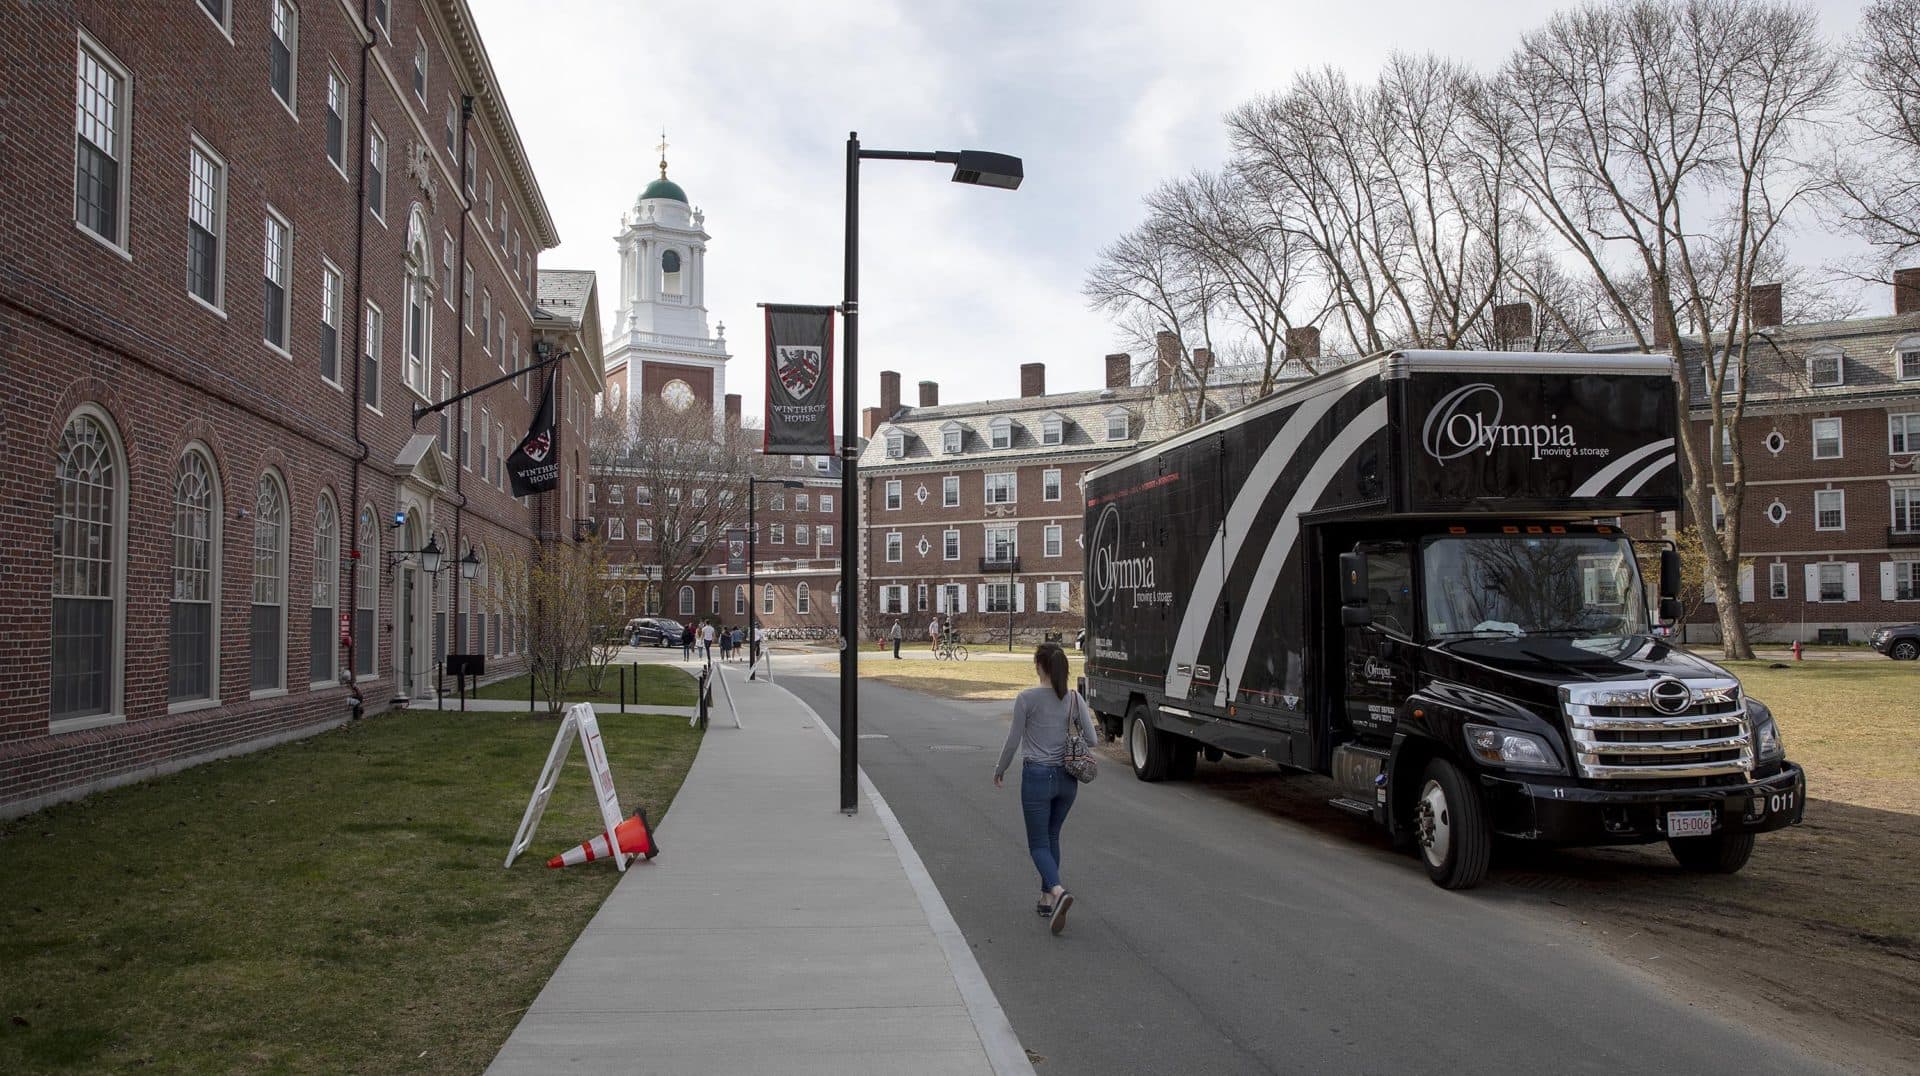 March 11: A moving vehicle waits near Harvard’s Winthrop House as the university prepares for student departures due to the coronavirus. (Robin Lubbock/WBUR)